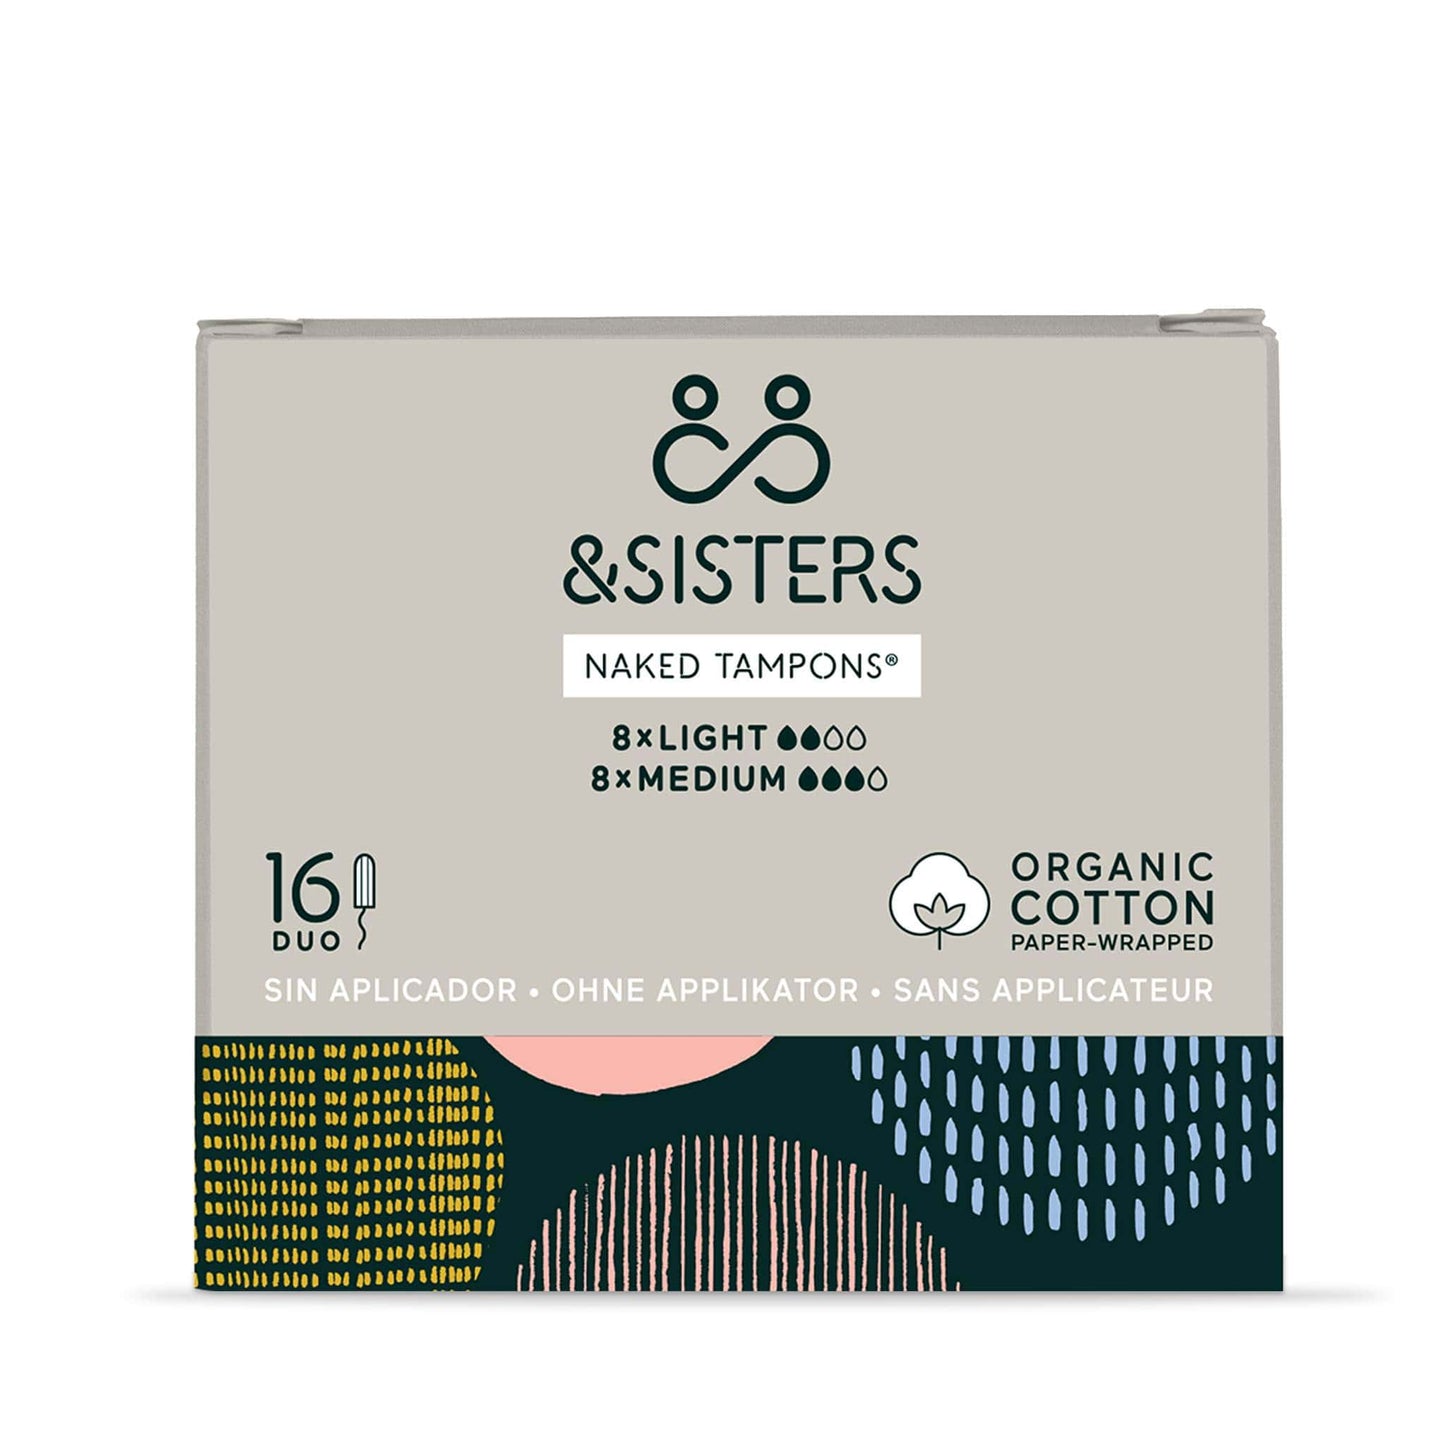 & SISTERS Tampons Duo Naked Tampons - Plastic-Free and Organic Cotton - & SISTERS